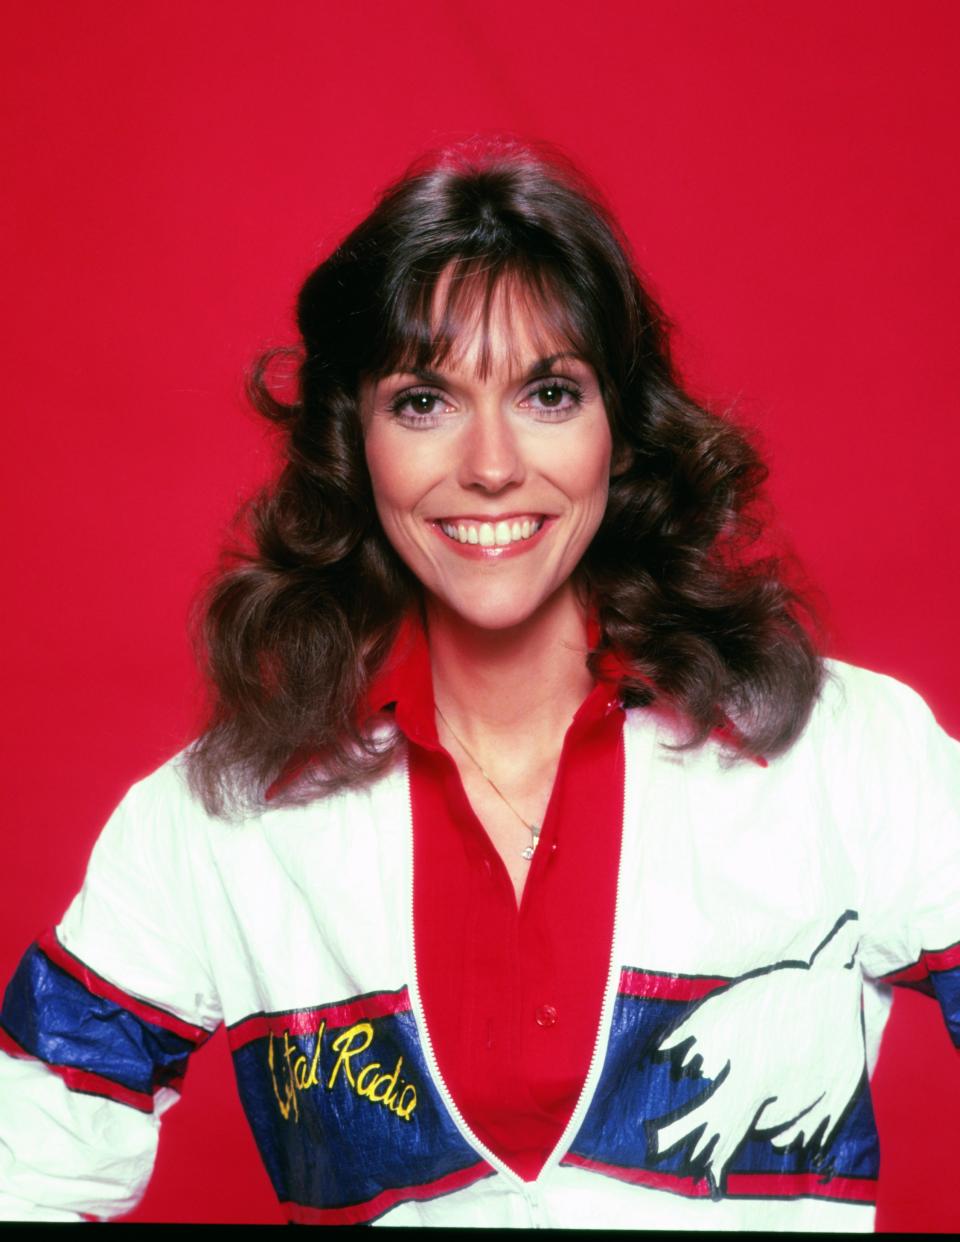 LOS ANGELES - 1981: Singer Karen Carpenter of the Carpenters poses for a portrait in 1981 in Los Angeles, California. (Photo by Harry Langdon/Getty Images) 